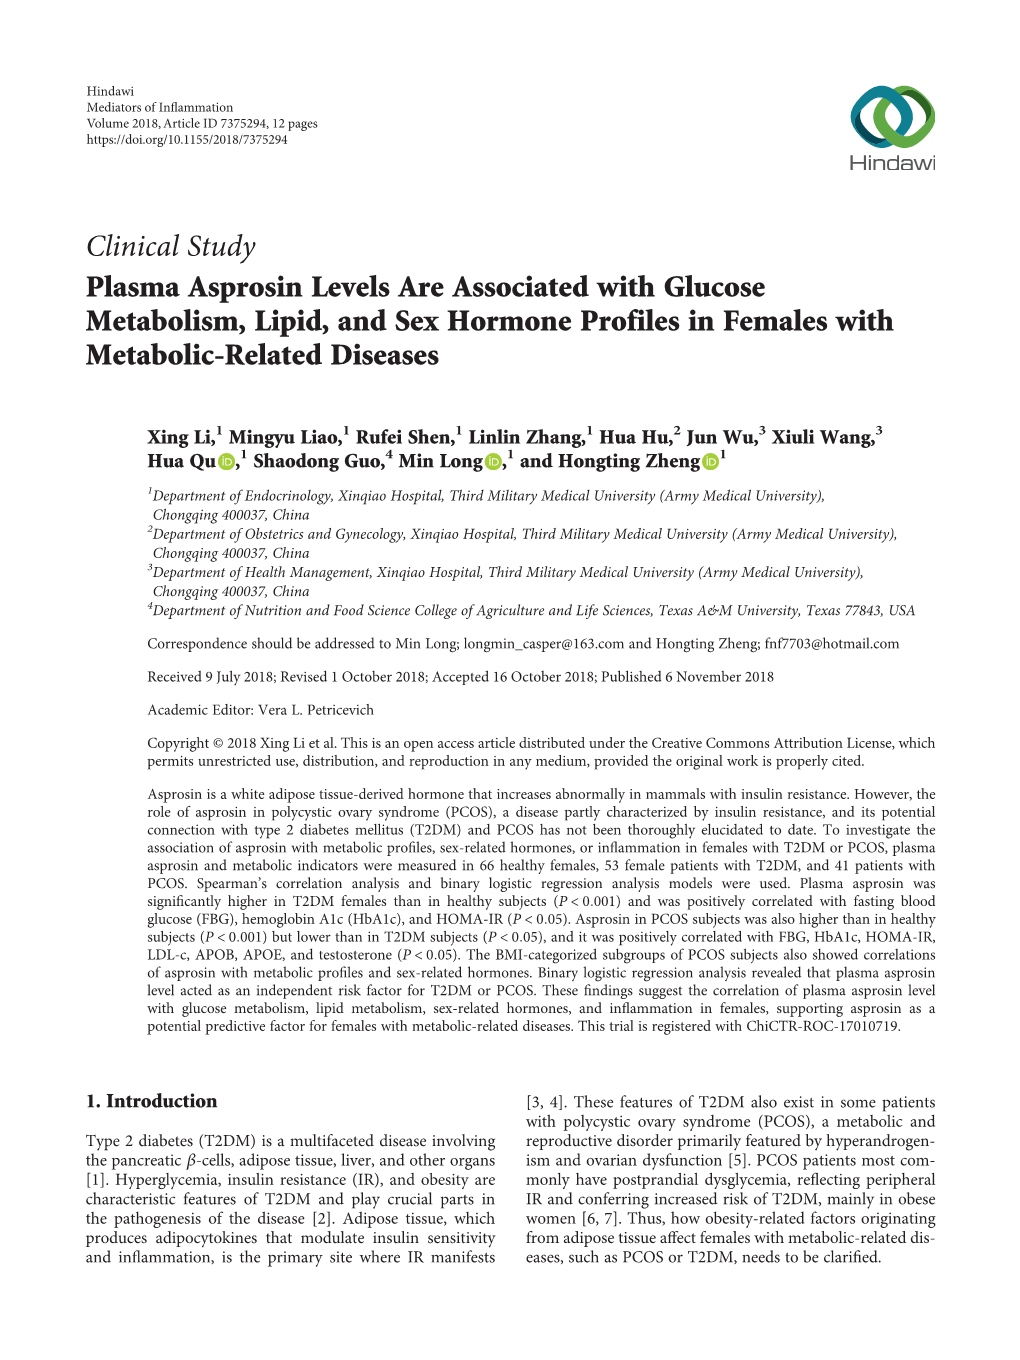 Clinical Study Plasma Asprosin Levels Are Associated with Glucose Metabolism, Lipid, and Sex Hormone Profiles in Females with Metabolic-Related Diseases